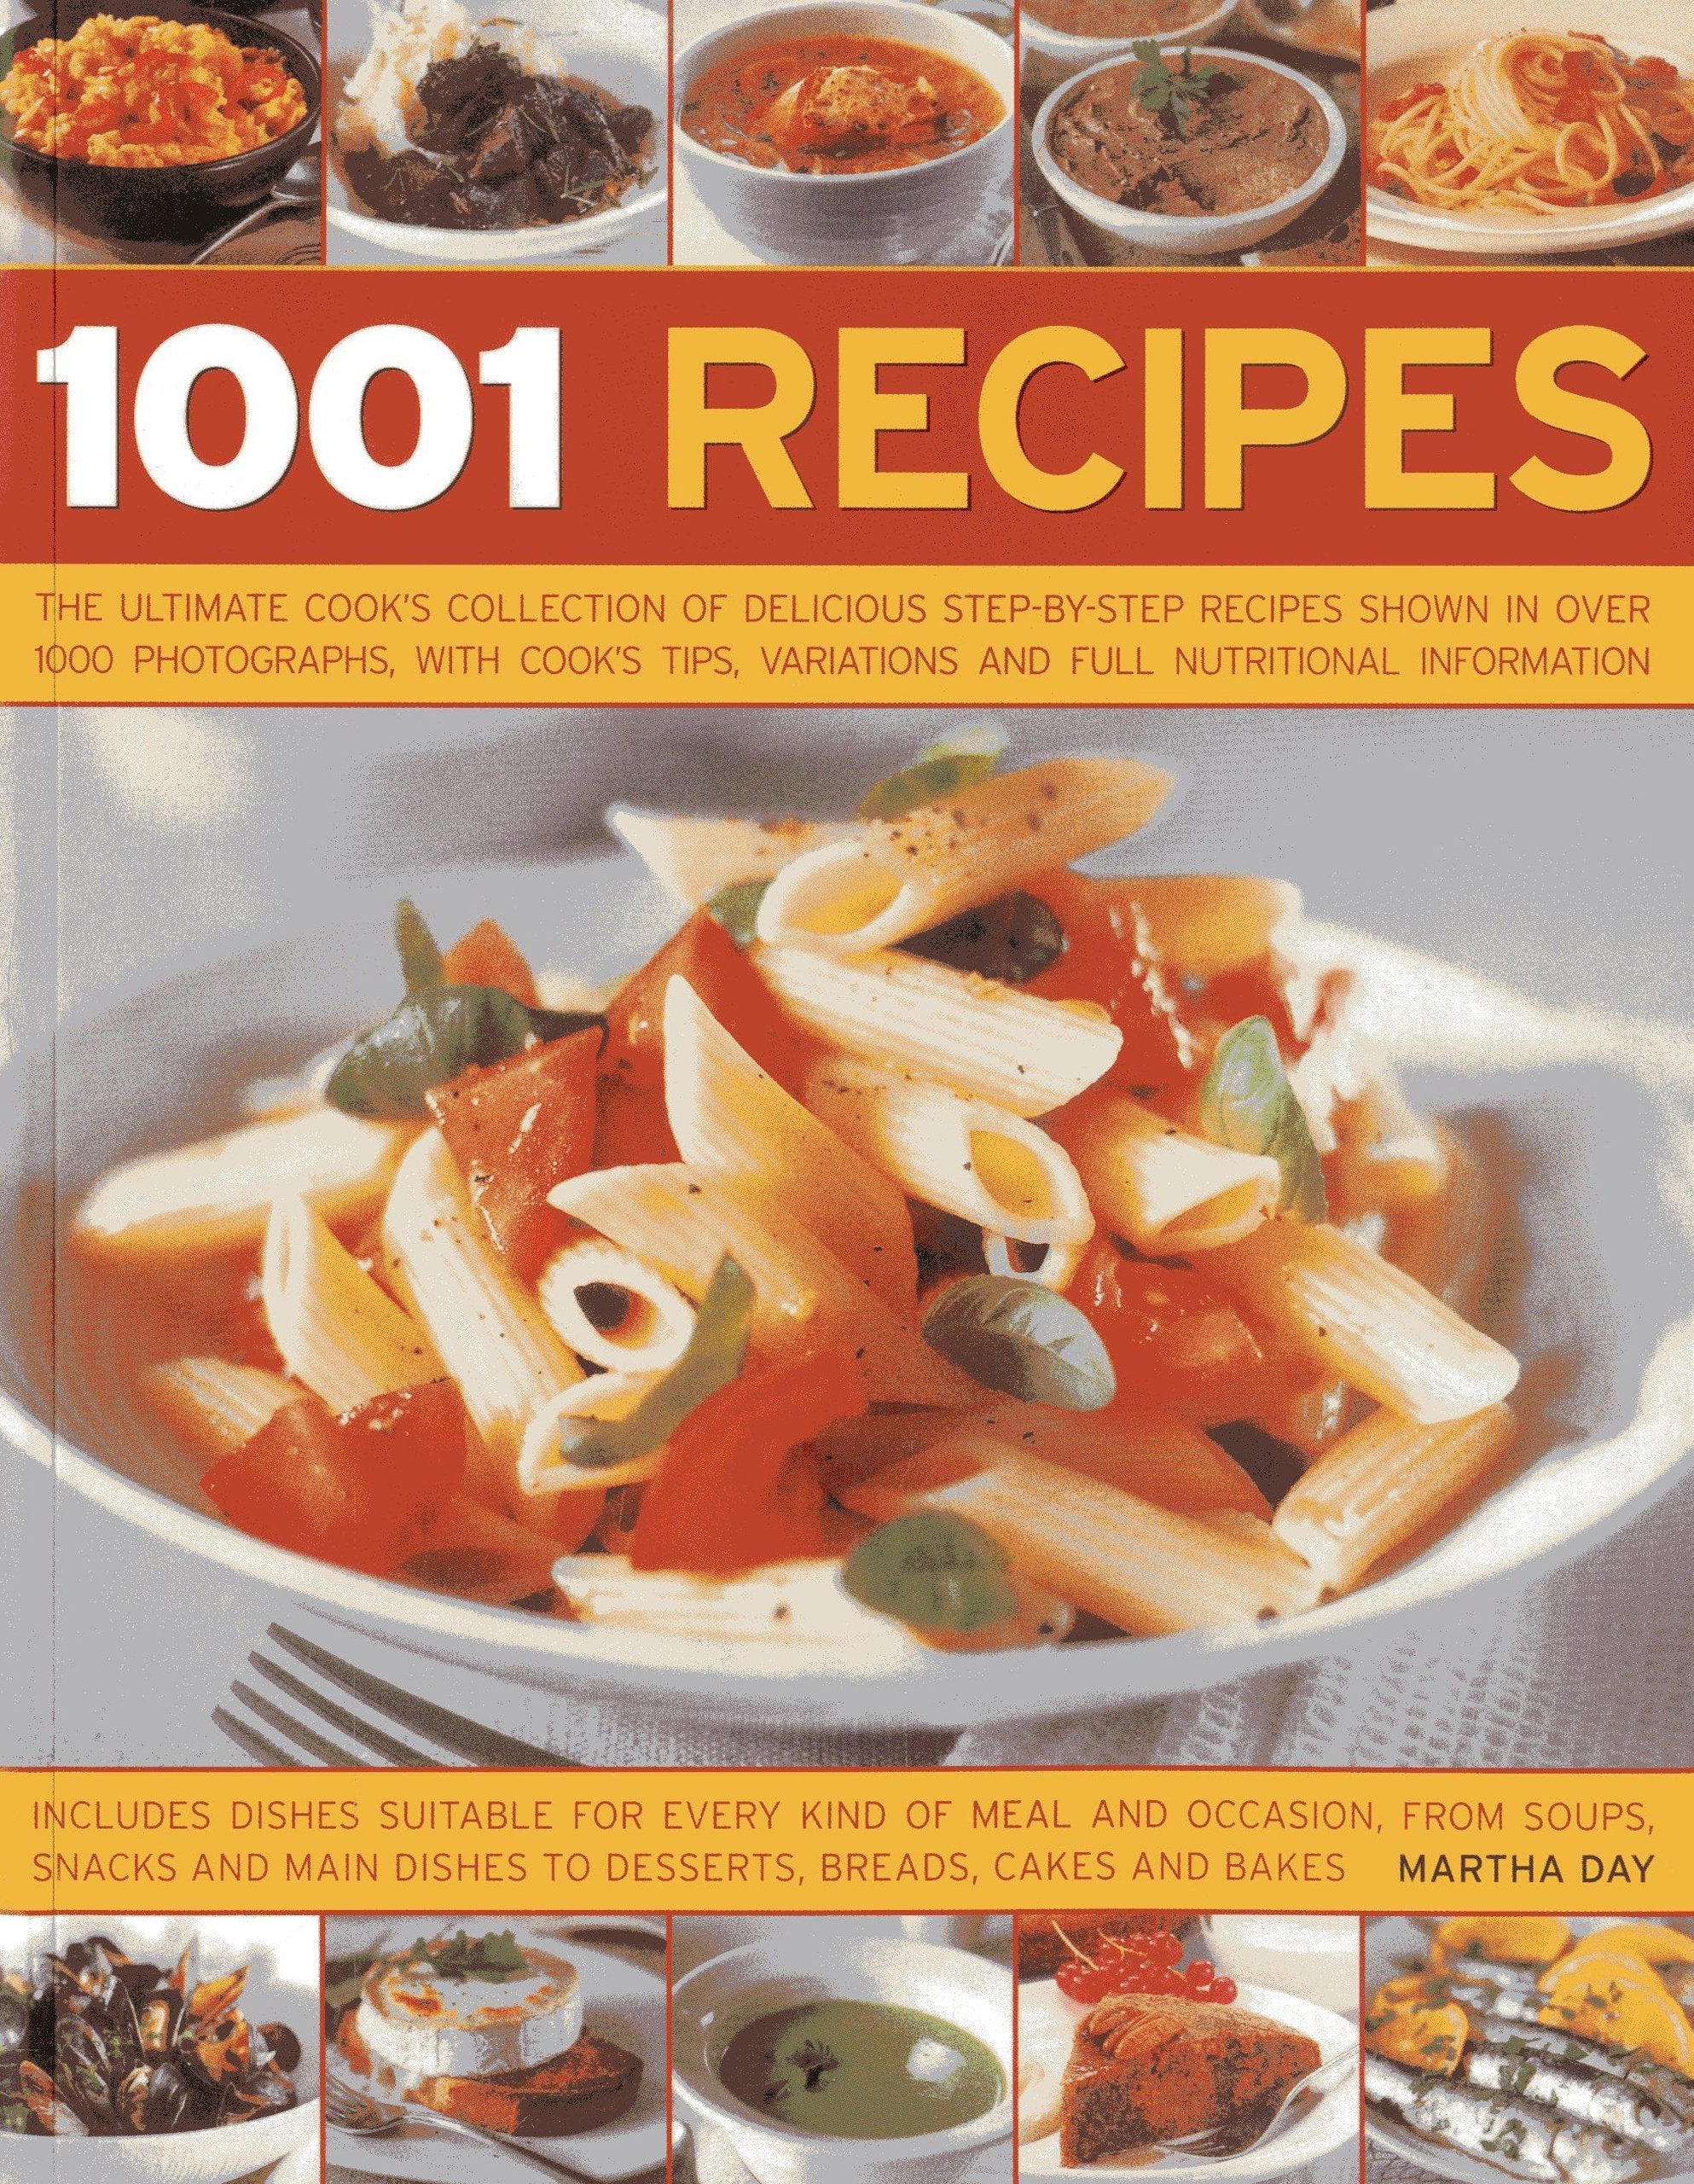 Livre ISBN 1846812151 1001 Recipes: The Ultimate Cook's Collection Of Delicious Step-By-Step Recipes Shown In Over 1000 Photographs, With Cook's Tips, Variations And Full Nutritional Information (Martha Day)